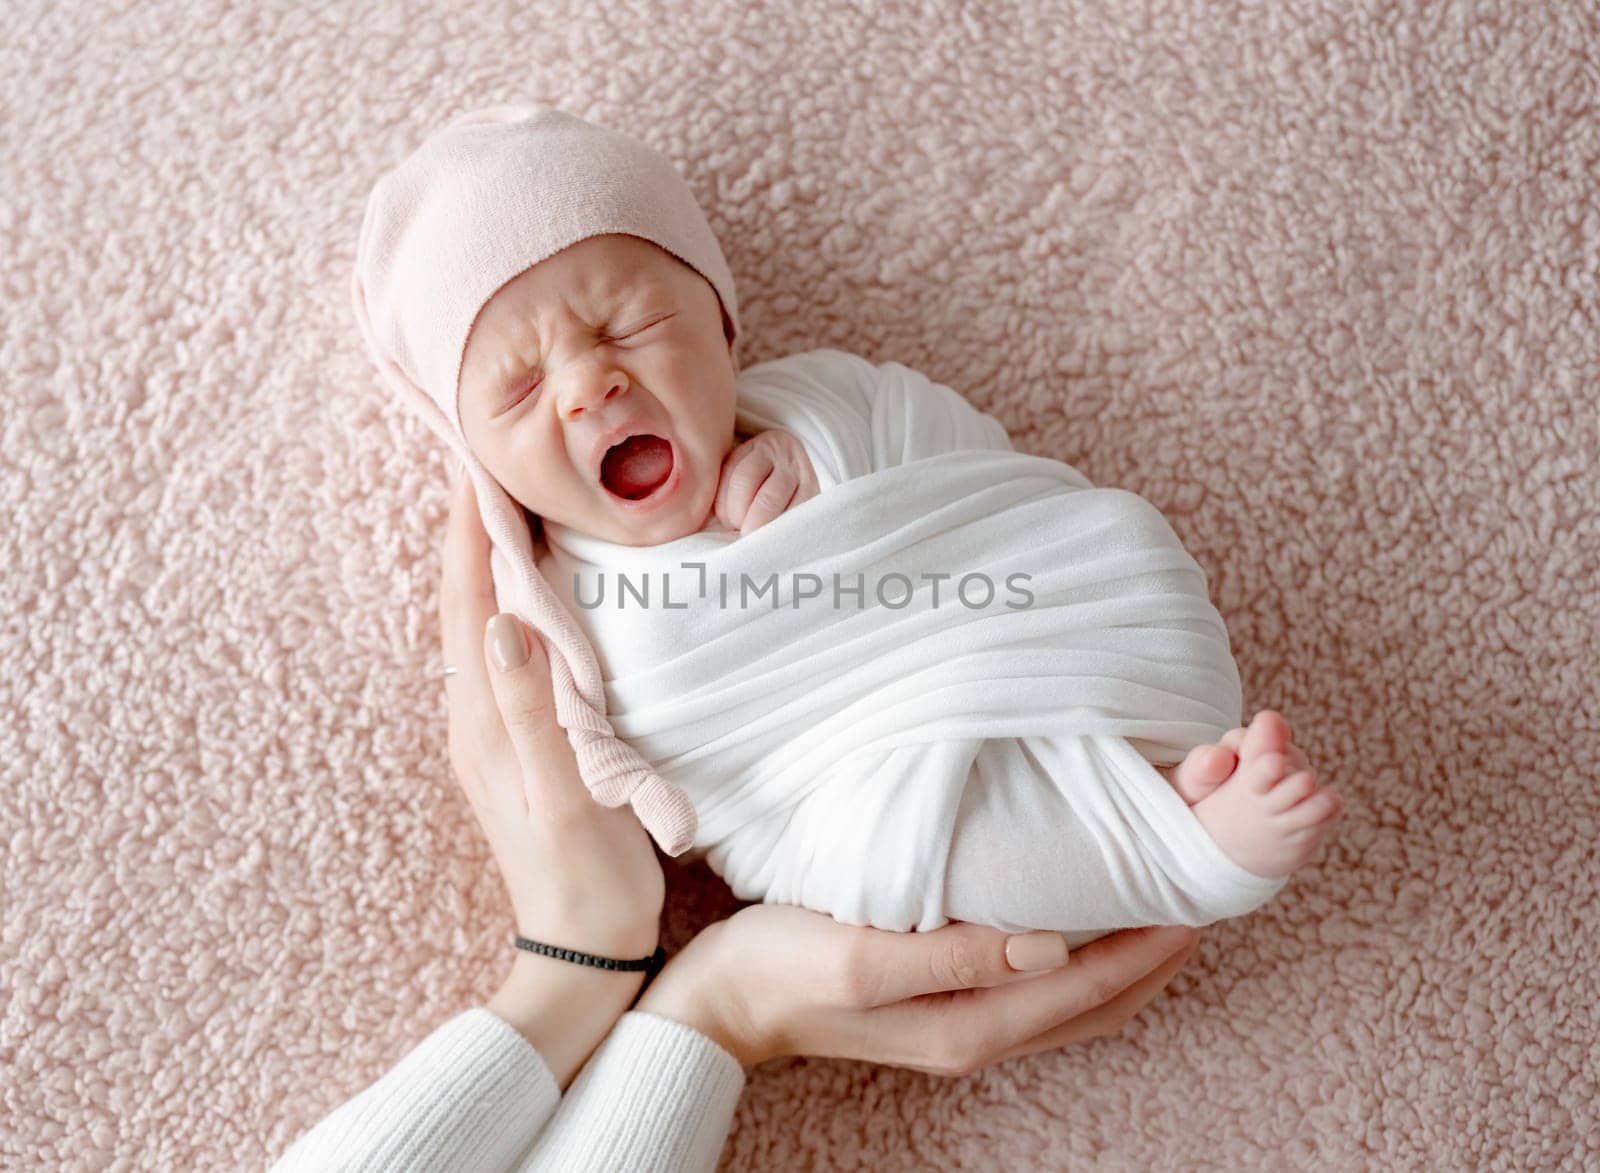 Newborn Baby Yawns In Sleep While Mother'S Hands Gently Hold Him by tan4ikk1